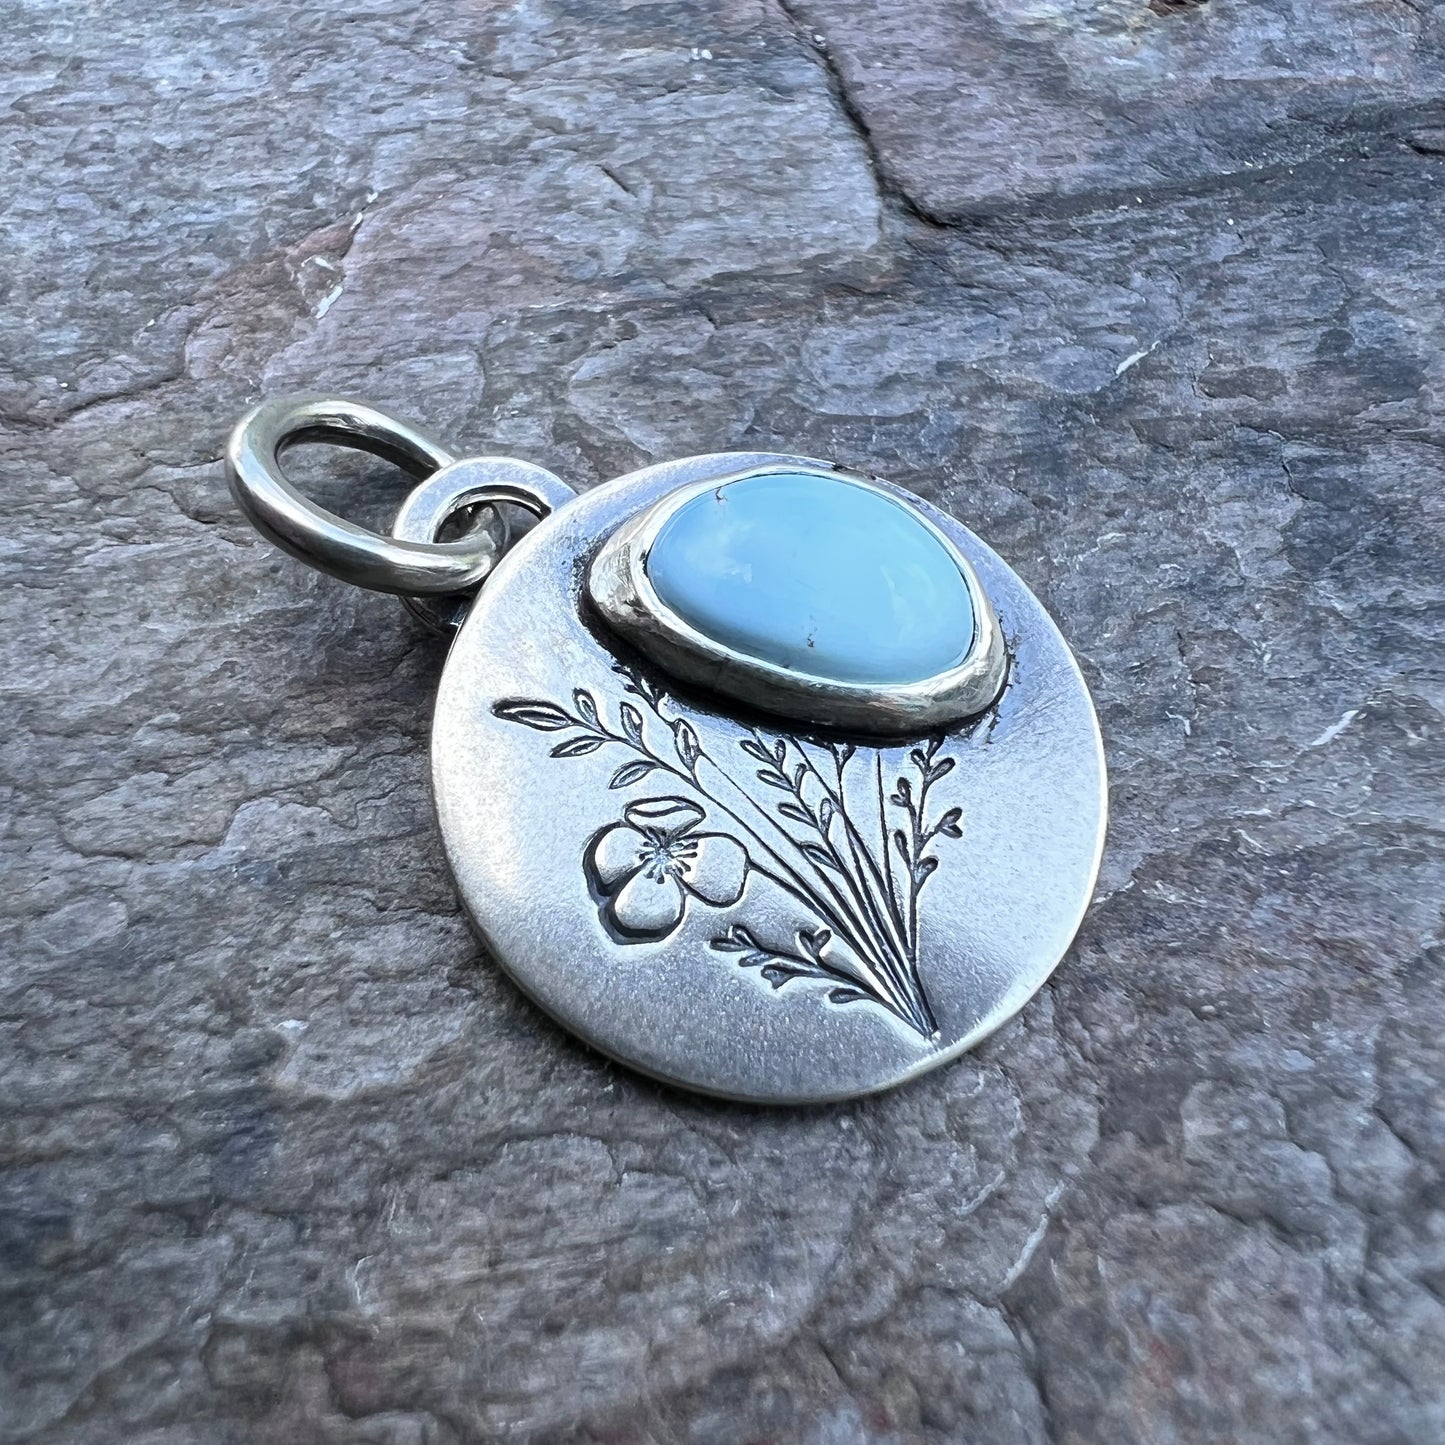 Turquoise Sterling Silver Wildflower Pendant - Handmade One-of-a-kind Pendant